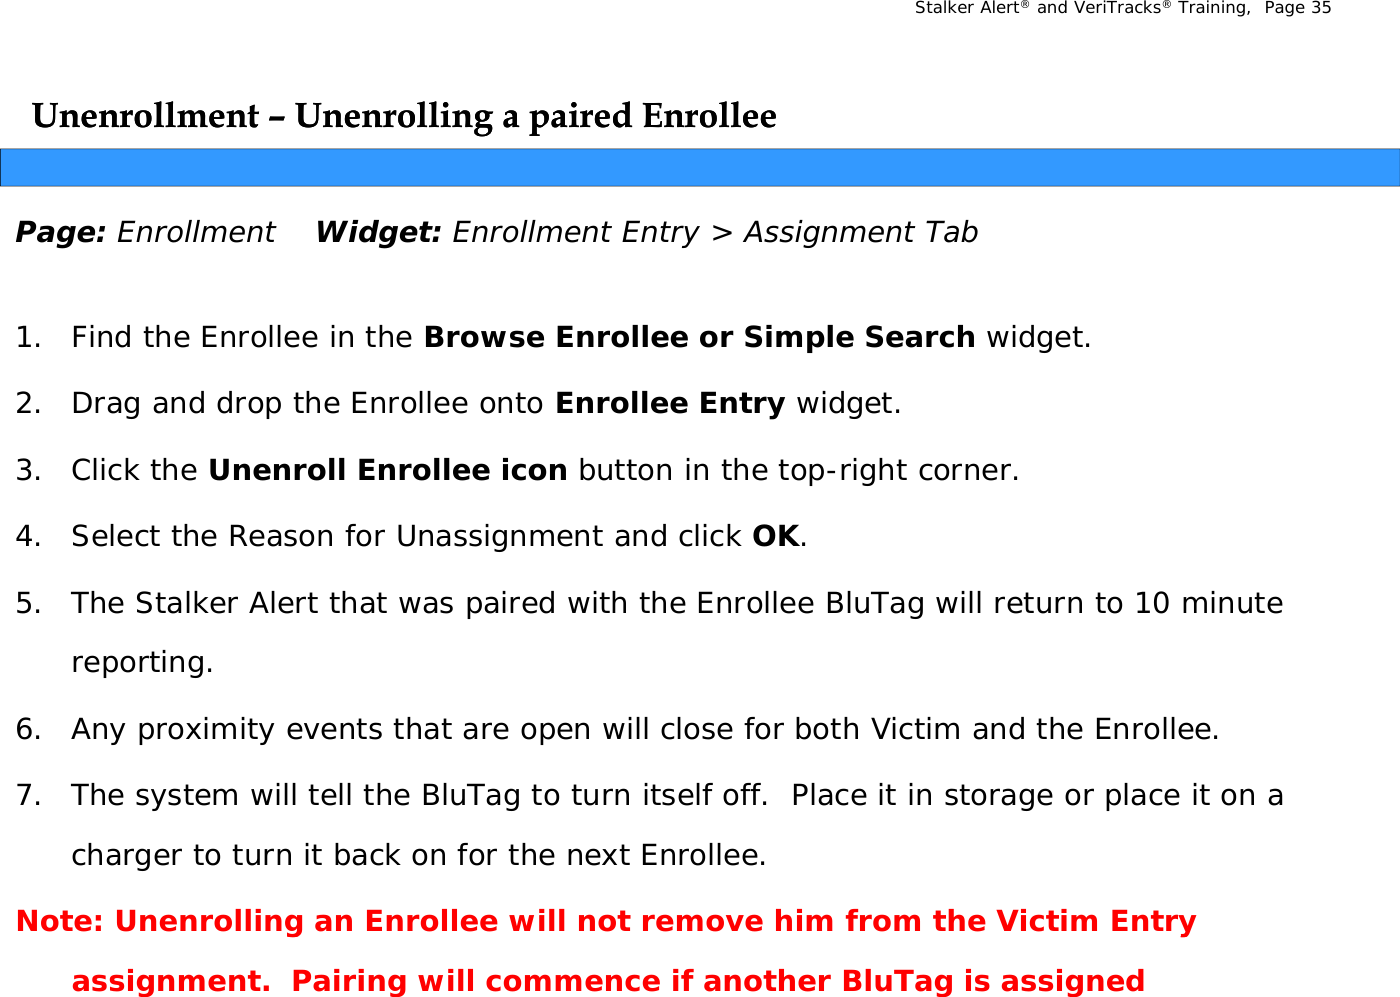 Stalker Alert®and VeriTracks®Training,  Page 35Unenrollment Unenrollment –– Unenrolling a paired EnrolleeUnenrolling a paired EnrolleegpgpPage: Enrollment Widget: Enrollment Entry &gt; Assignment Tab1. Find the Enrollee in the Browse Enrollee or Simple Search widget.2. Drag and drop the Enrollee onto Enrollee Entry widget. 3. Click the Unenroll Enrollee icon button in the top-right corner.4. Select the Reason for Unassignment and click OK.5. The Stalker Alert that was paired with the Enrollee BluTag will return to 10 minute pgreporting. 6. Any proximity events that are open will close for both Victim and the Enrollee. 7. The system will tell the BluTag to turn itself off.  Place it in storage or place it on a charger to turn it back on for the next Enrollee.Note: Unenrolling an Enrollee will not remove him from the Victim Entry gyassignment.  Pairing will commence if another BluTag is assigned